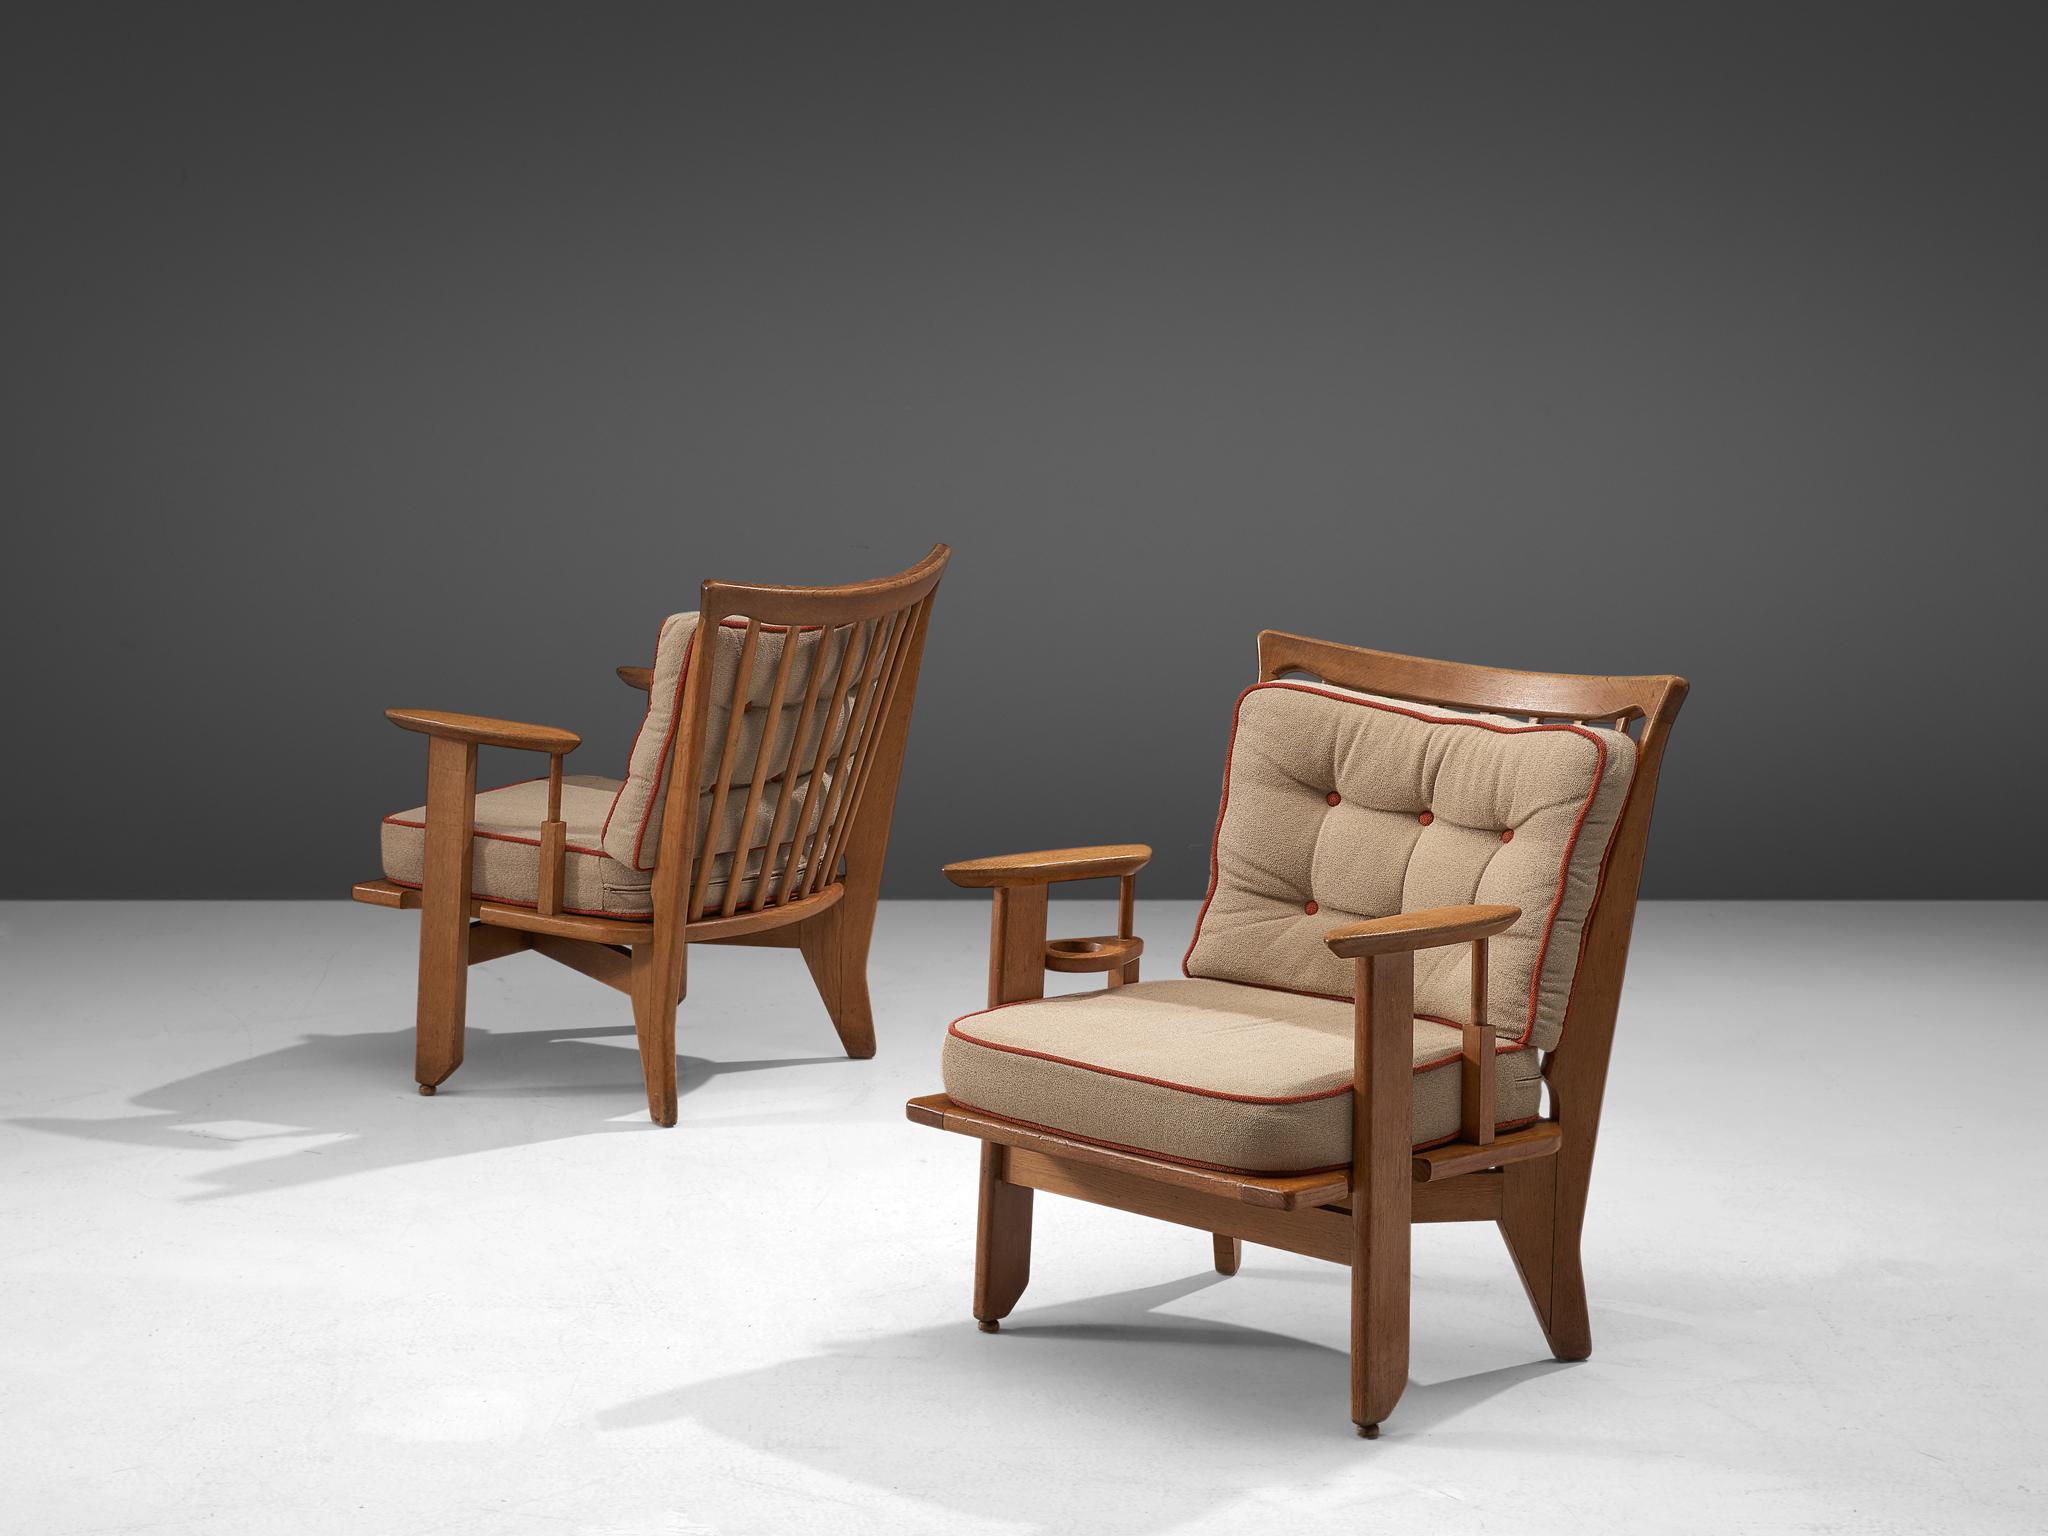 Guillerme and Chambron, pair of lounge chairs, fabric, oak, France, 1950s

These sculptural easy chairs are designed by Guillerme and Chambron and feature striking armrest. The duo is known for their high quality solid oak furniture, of which this